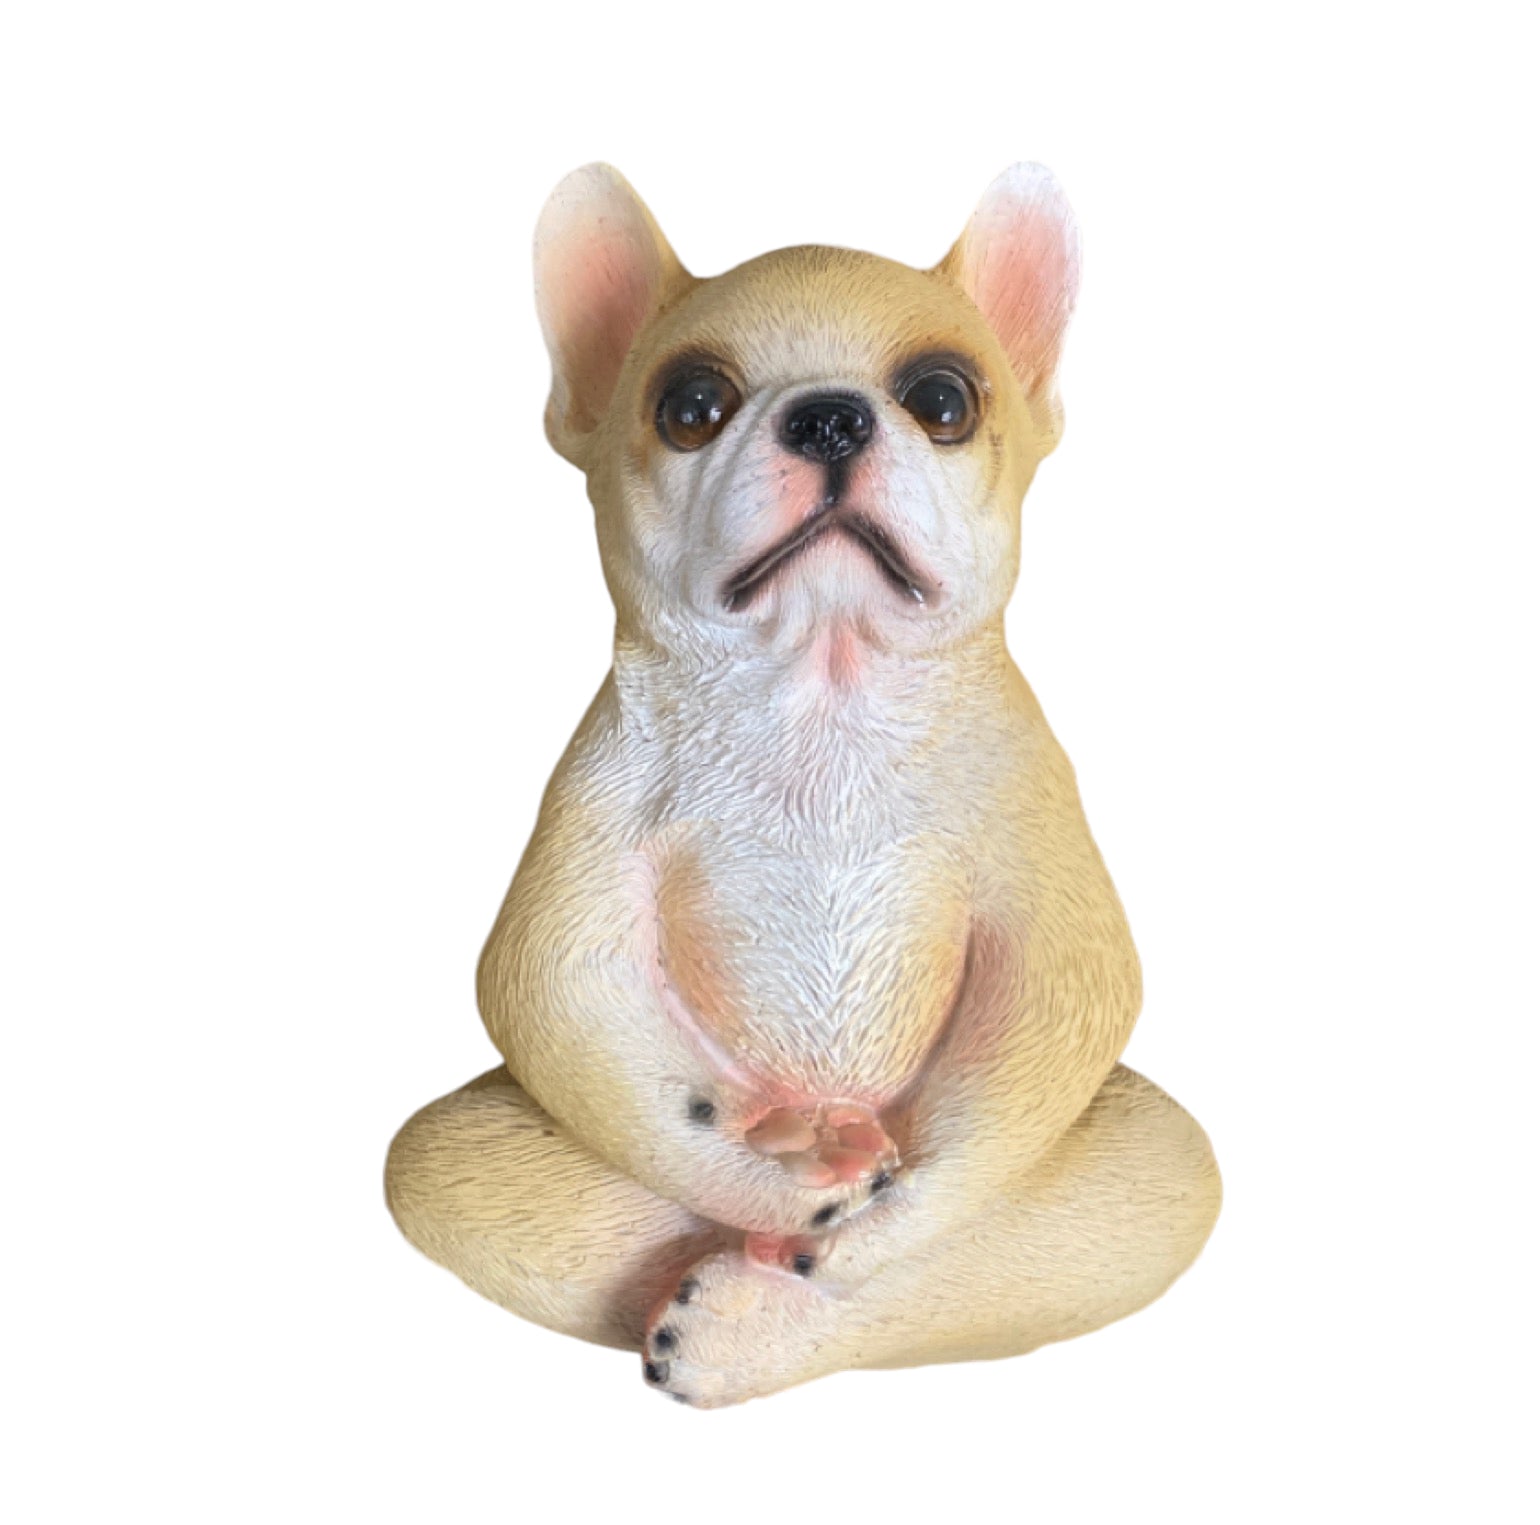 Dog Yoga Meditation Zen Ornament - The Renmy Store Homewares & Gifts 